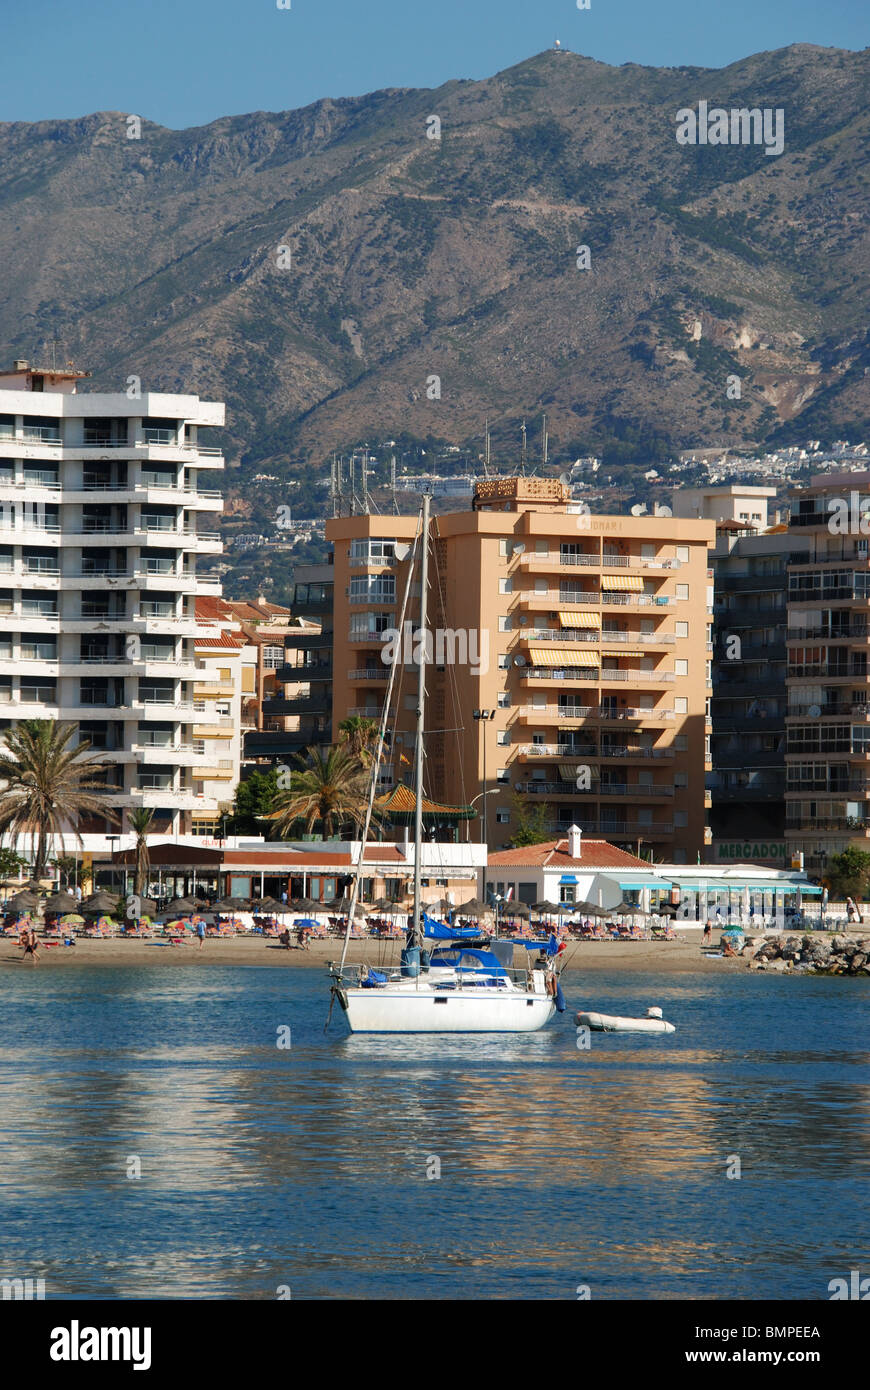 Yacht in the harbour, Fuengirola, Costa del Sol, Malaga Province, Andalucia, Spain, Western Europe. Stock Photo